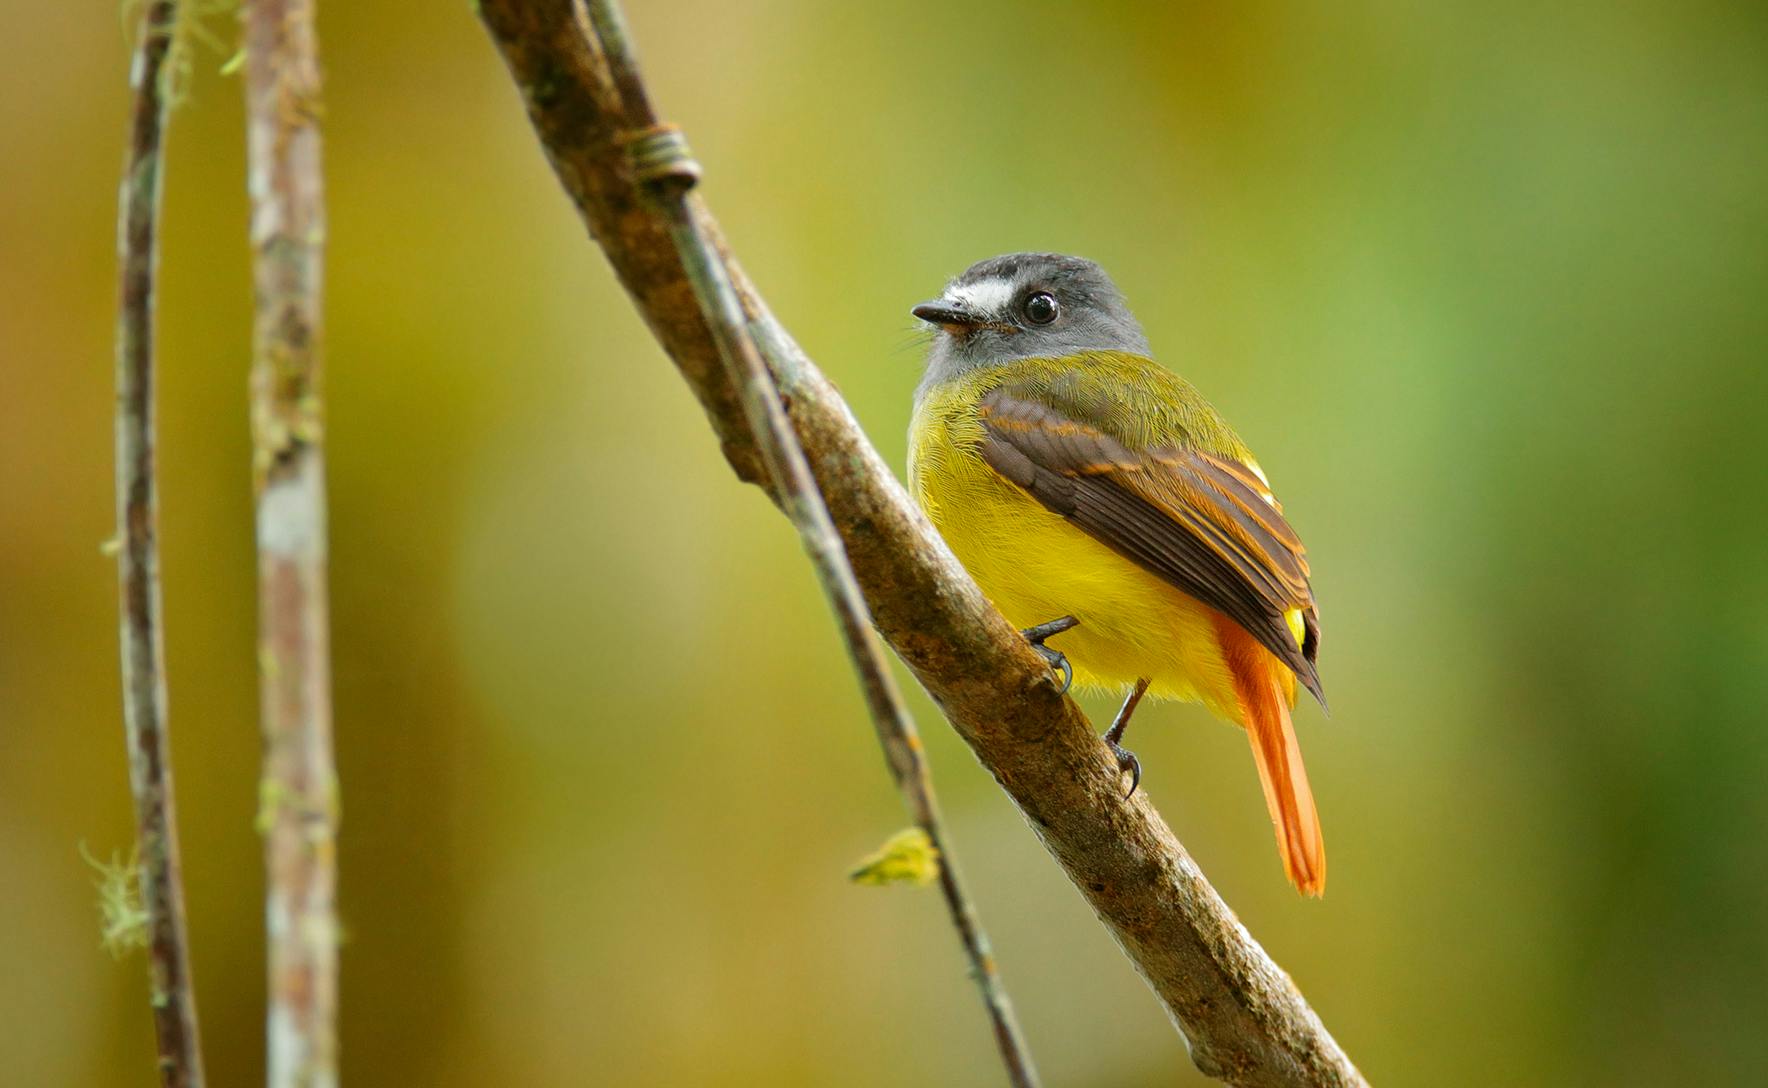 A bright yellow breasted bird with green feathers and an orange tail is in focus sitting on a branch. The green background is blurred. 